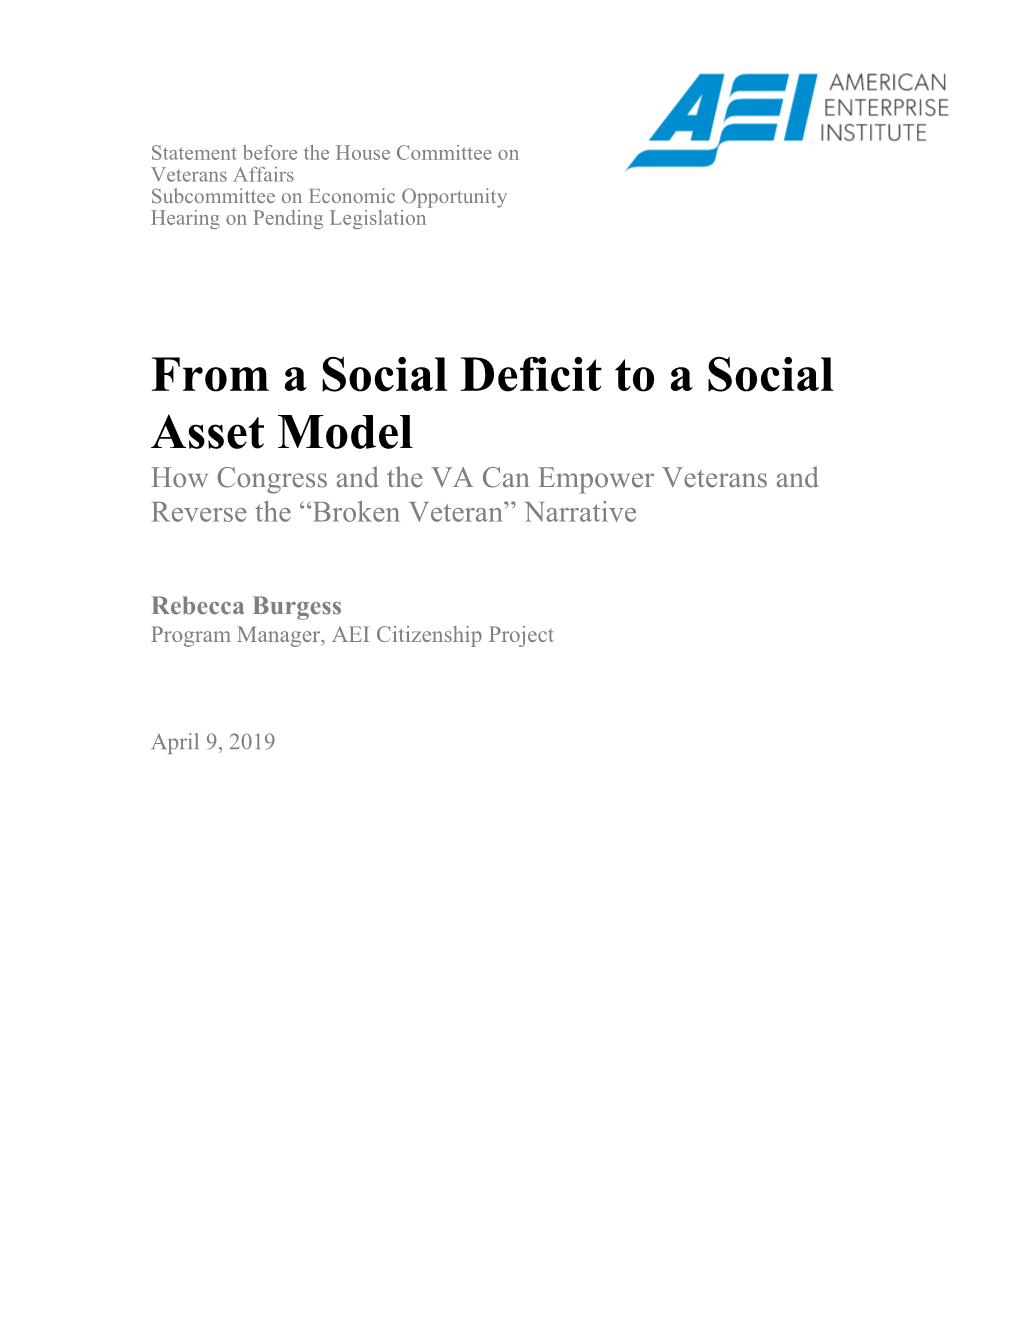 From a Social Deficit to a Social Asset Model How Congress and the VA Can Empower Veterans and Reverse the “Broken Veteran” Narrative